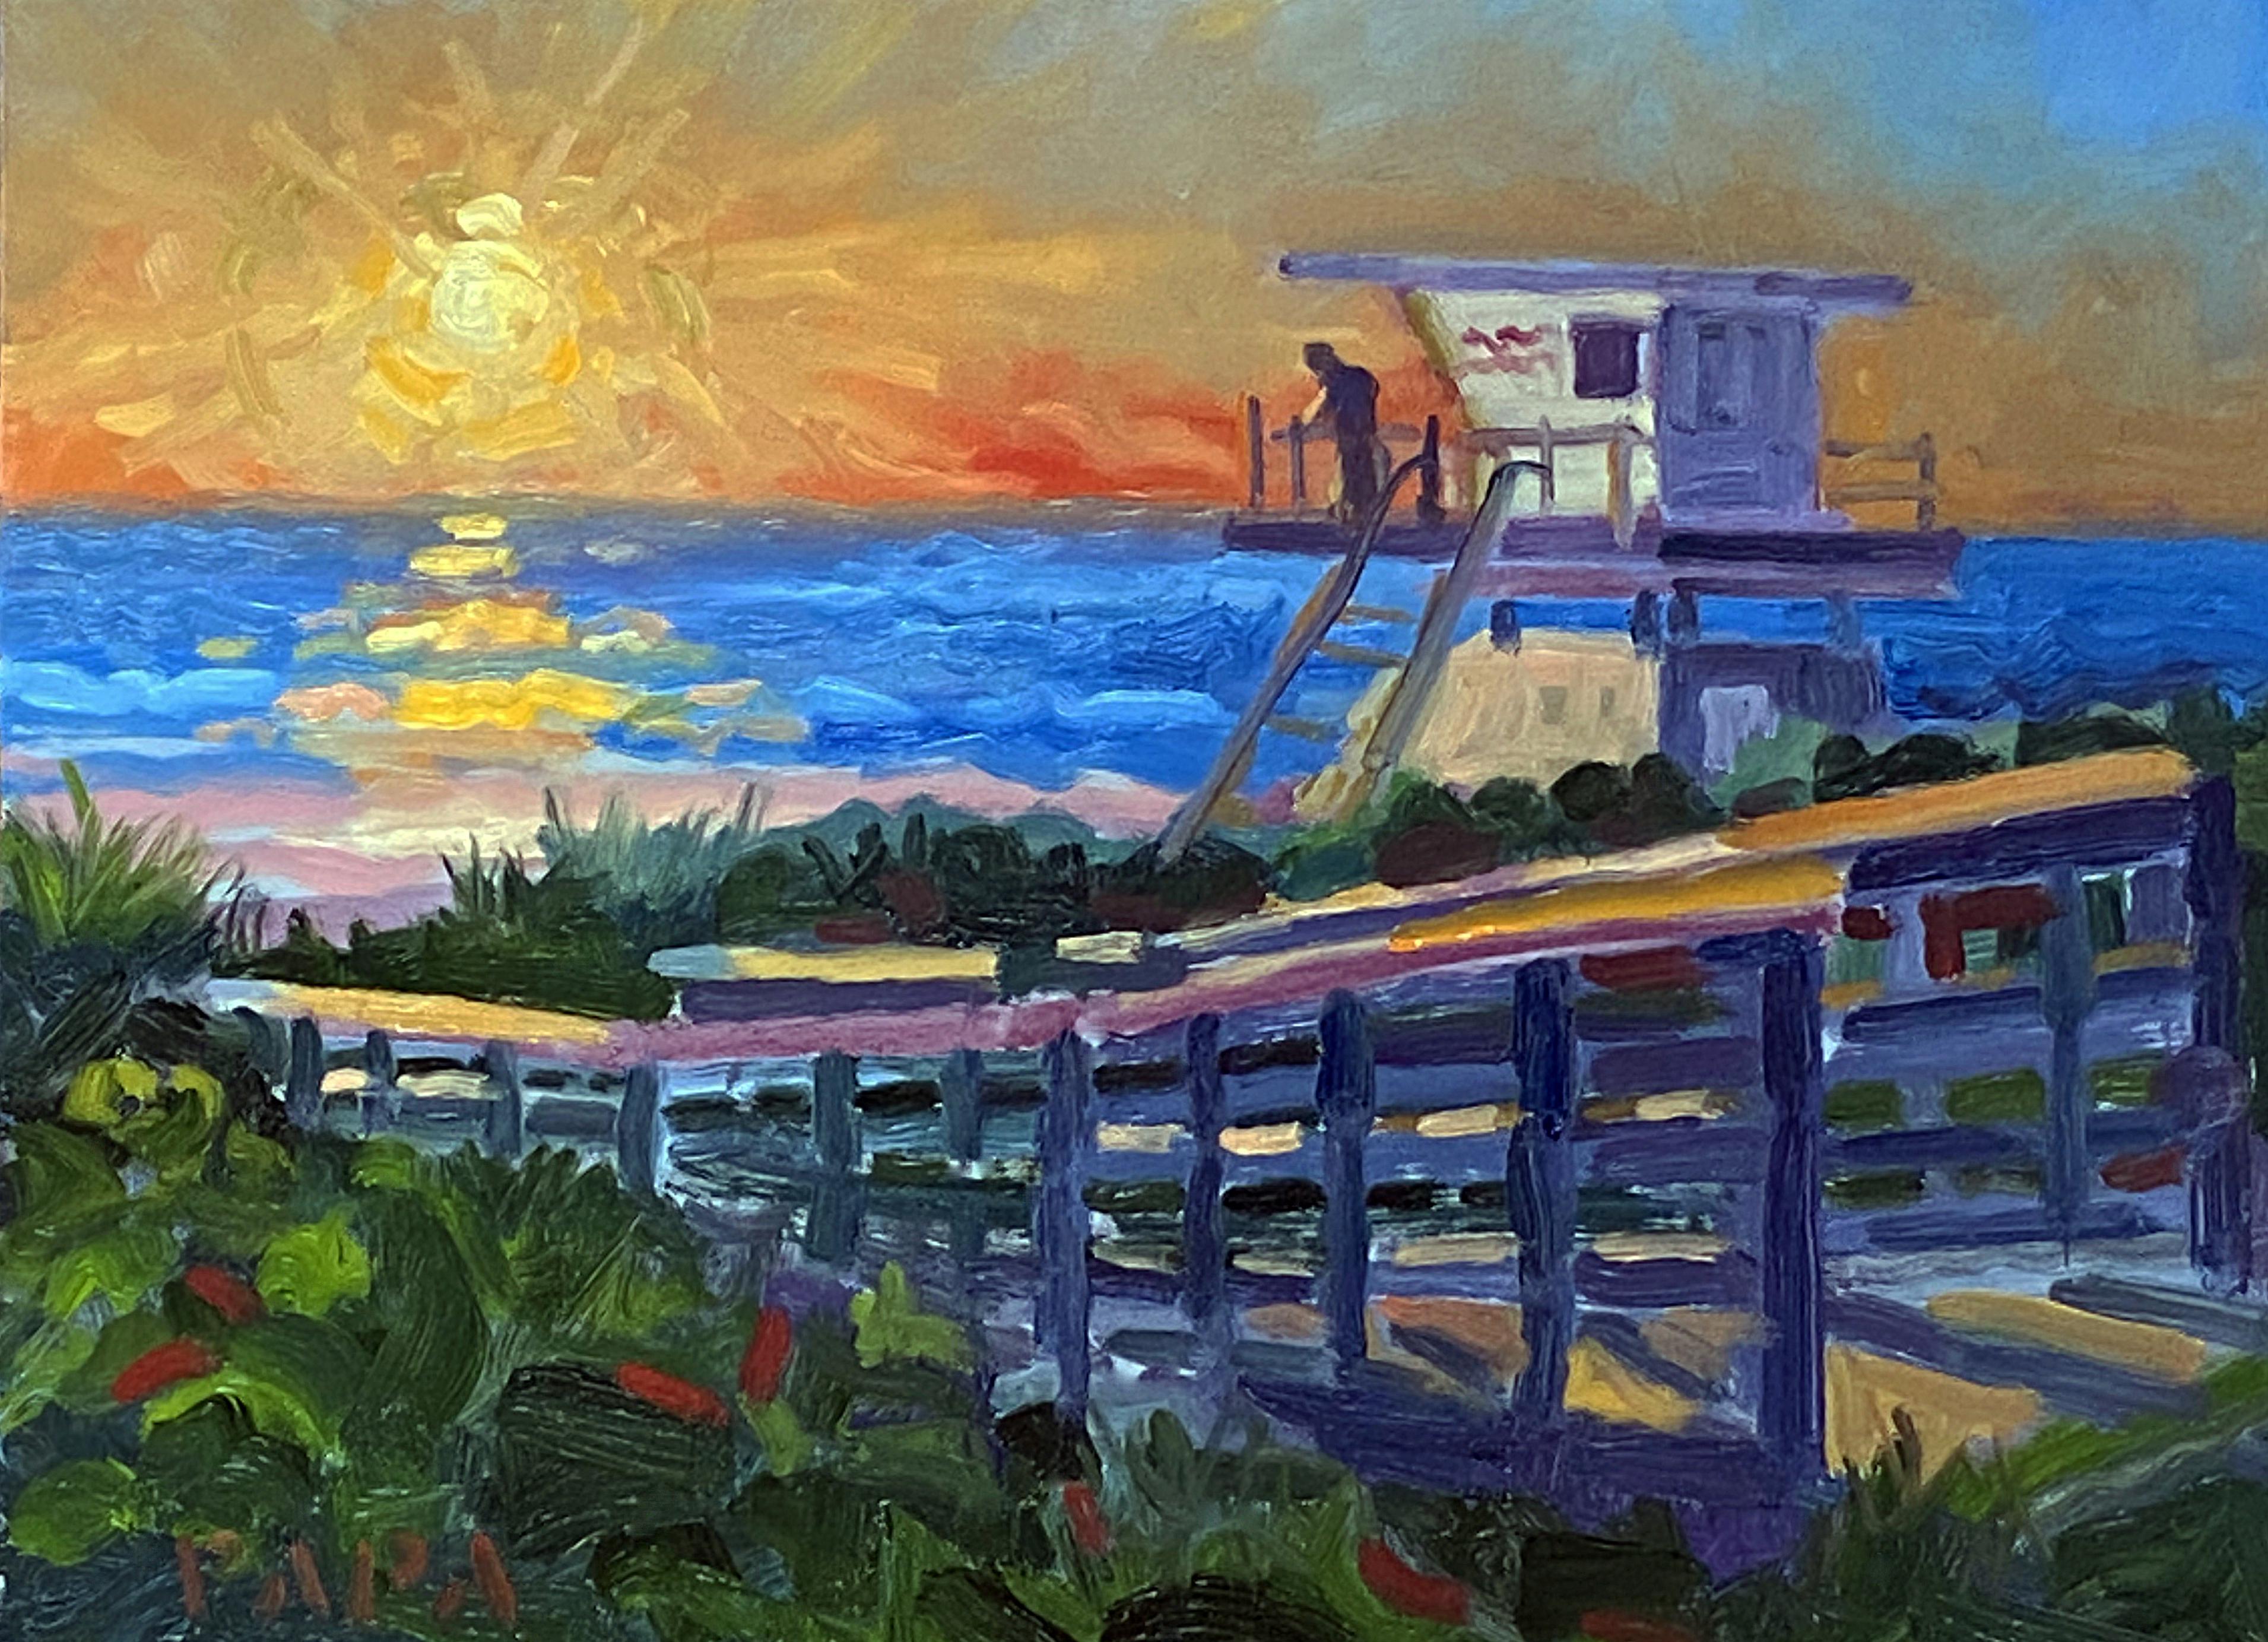 Sunrise at Hobe Sound "A New Day" by Ralph Papa 